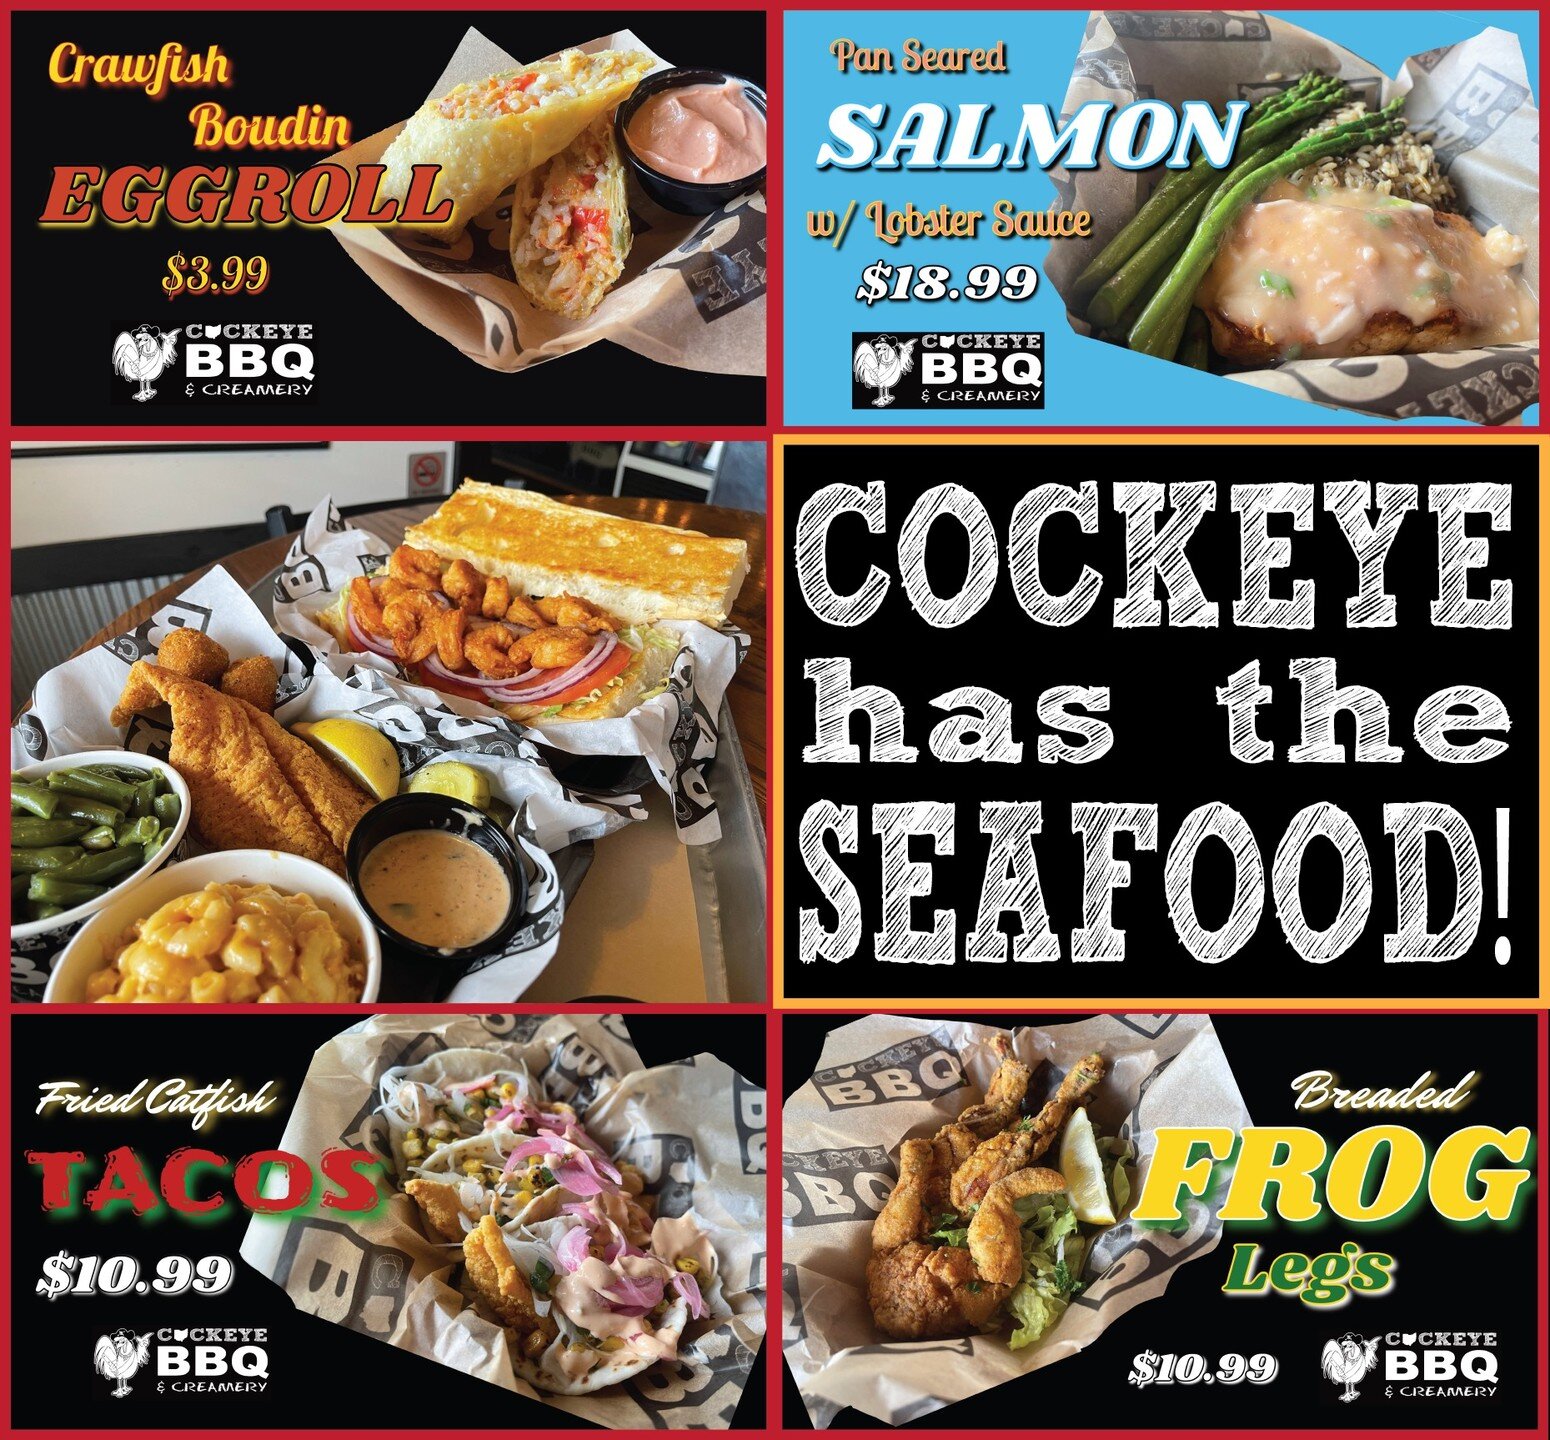 SALMON and CRAWFISH and FROG LEGS... OH MY!
COCKEYE has all sorts of fun Clothesline Specials up for Lent! Plus, our regular menu staples like Fried/Cajun Shrimp or Catfish available in Dinners or on Po-Boy Sandwiches!
Order Online ➡️ https://order.t